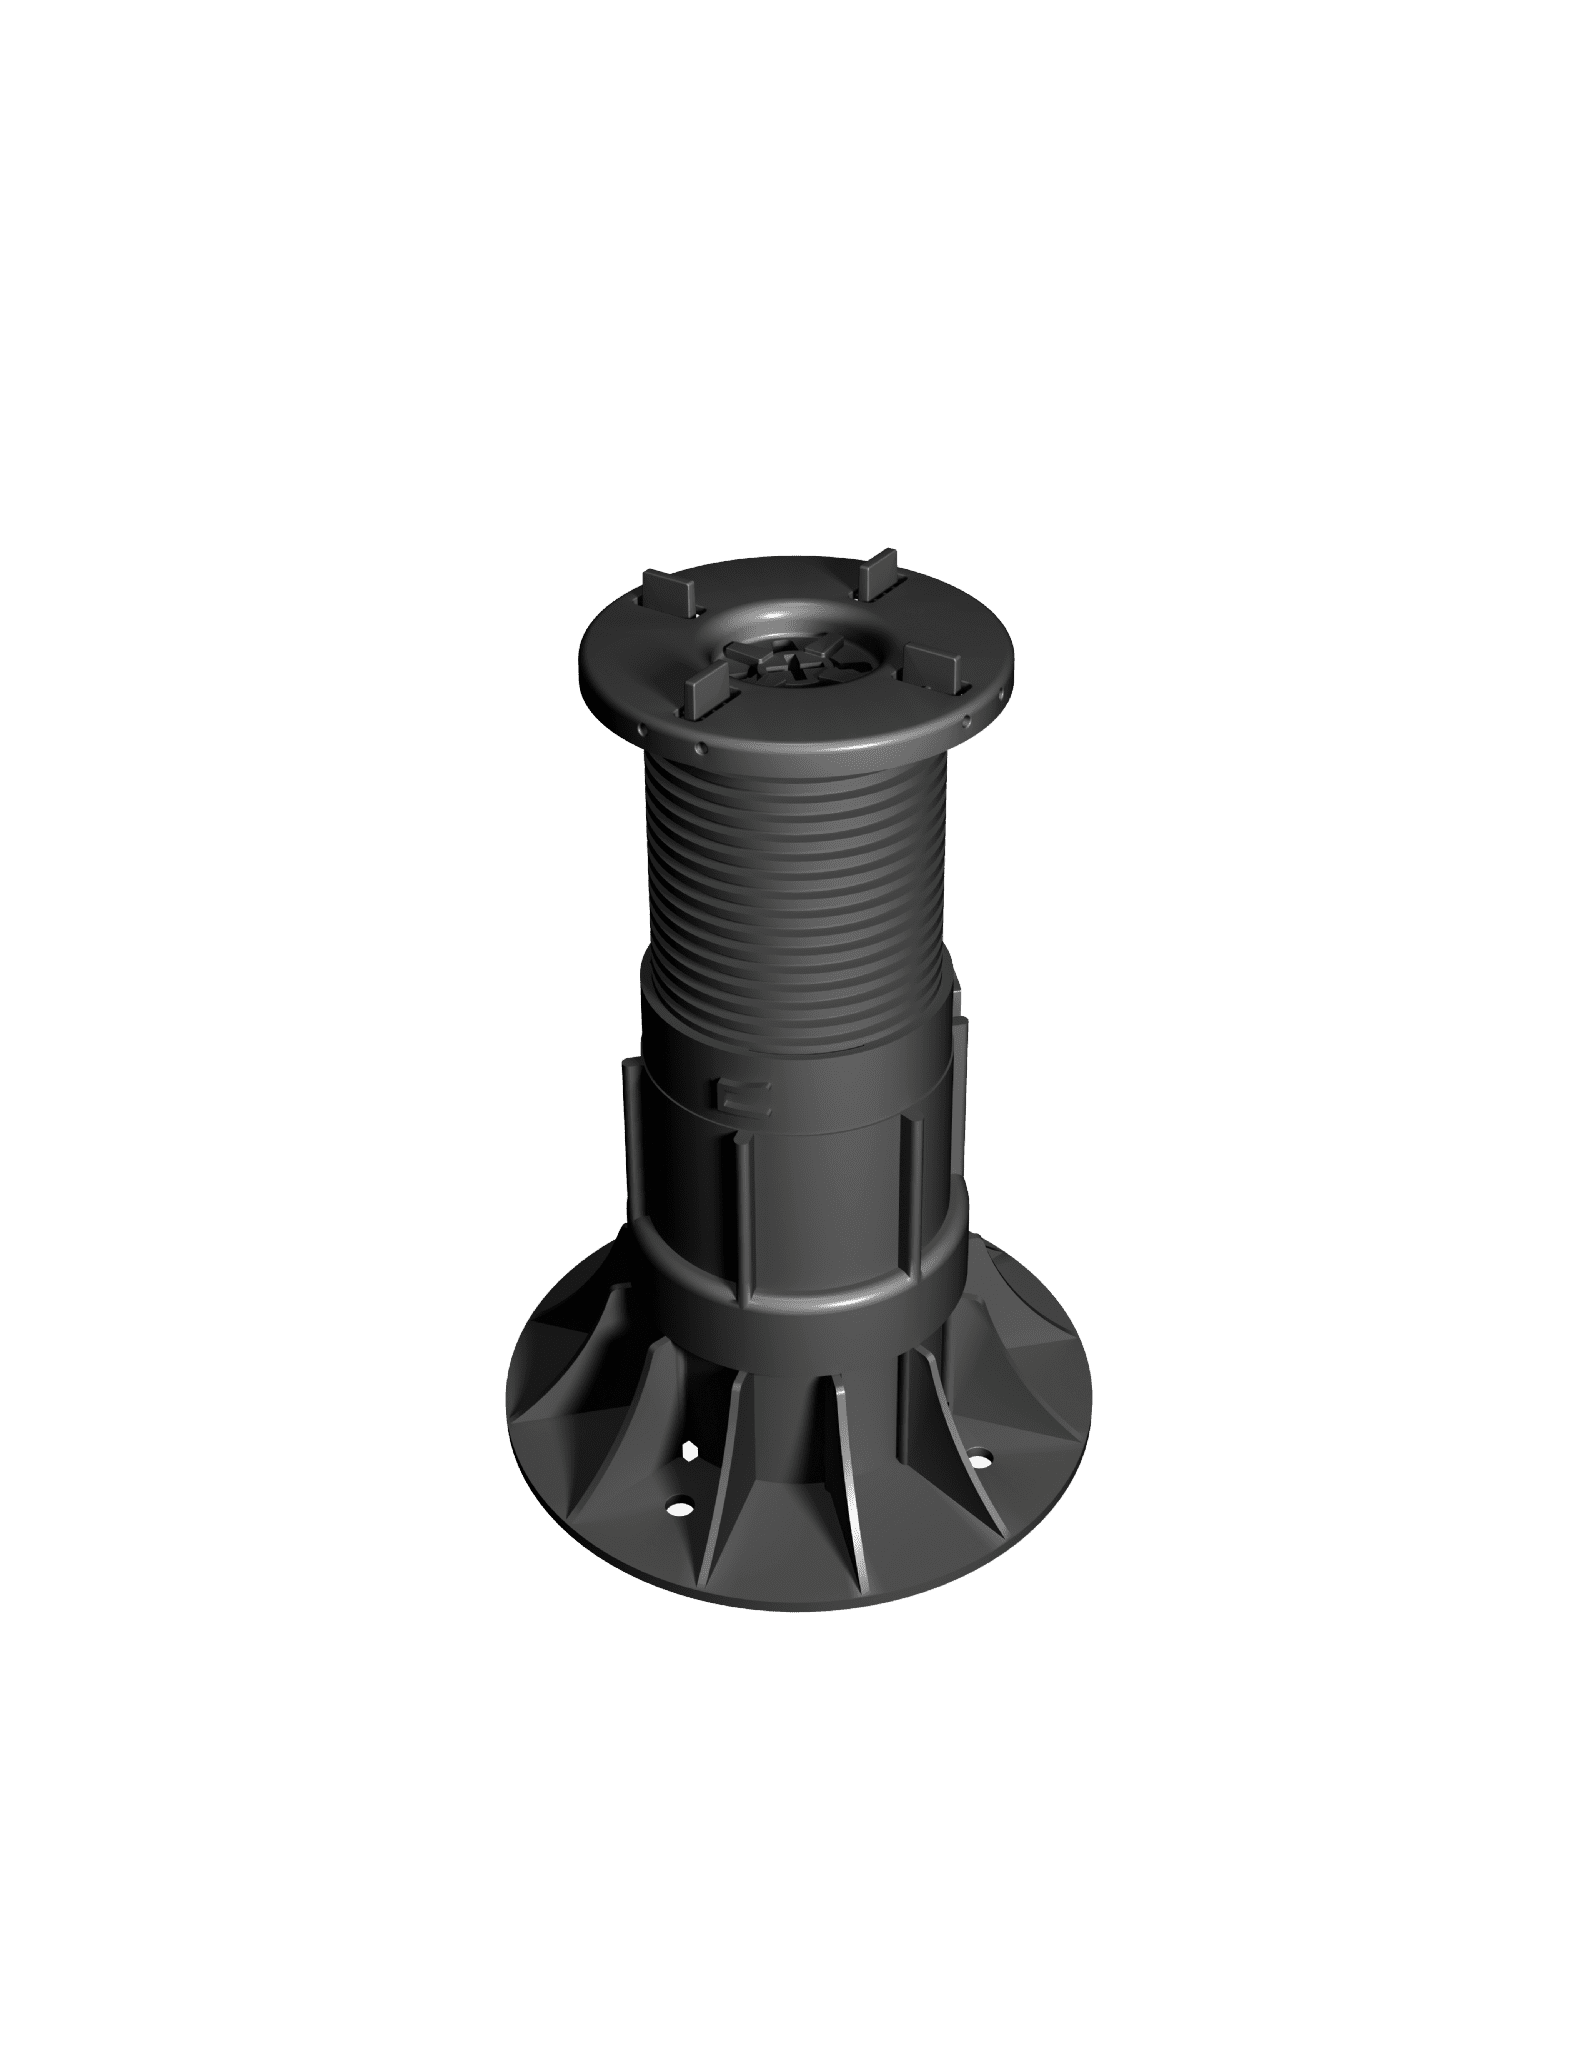 Ryno RPA Self-Levelling Adjustable Paving Pedestals - All sizes